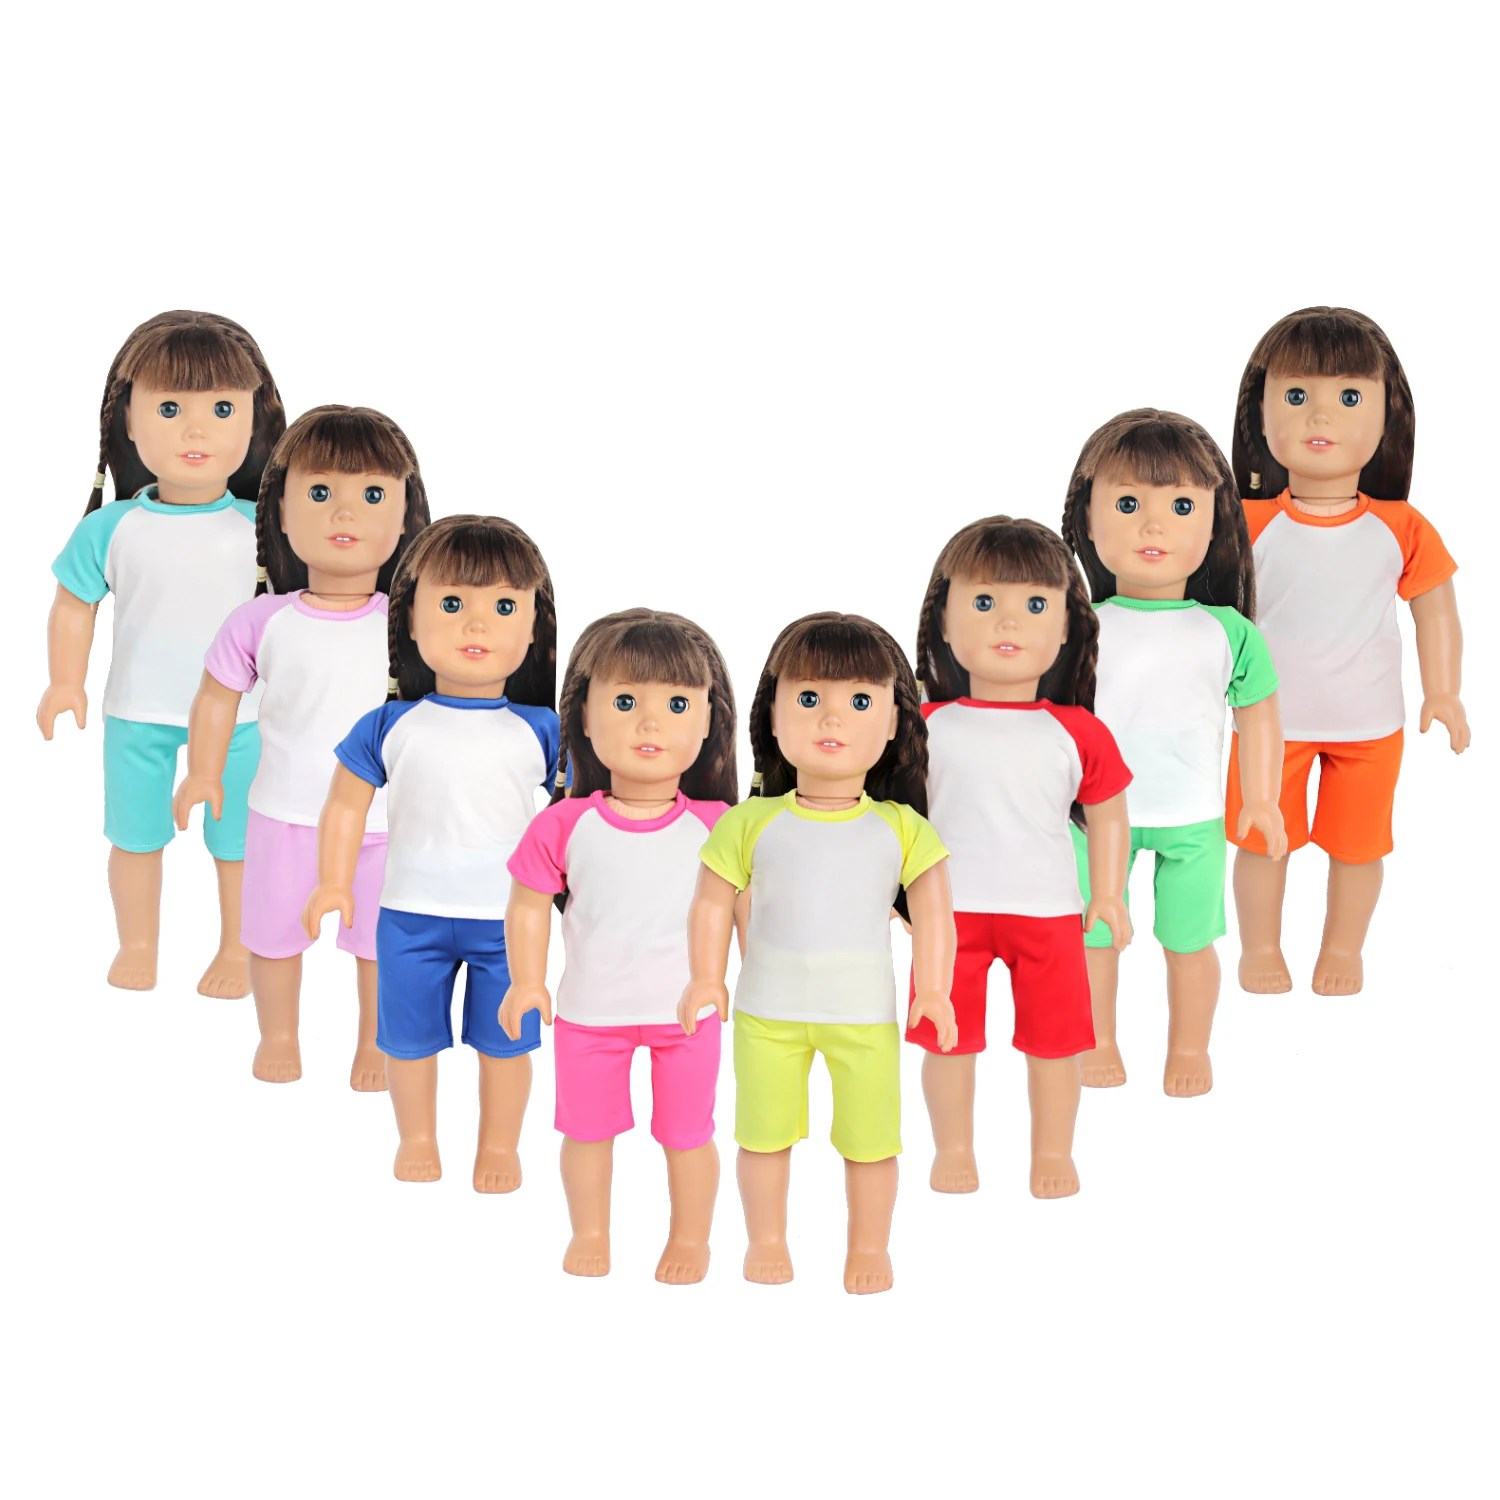 New arrival 18 inch doll clothes American doll girl pajamas